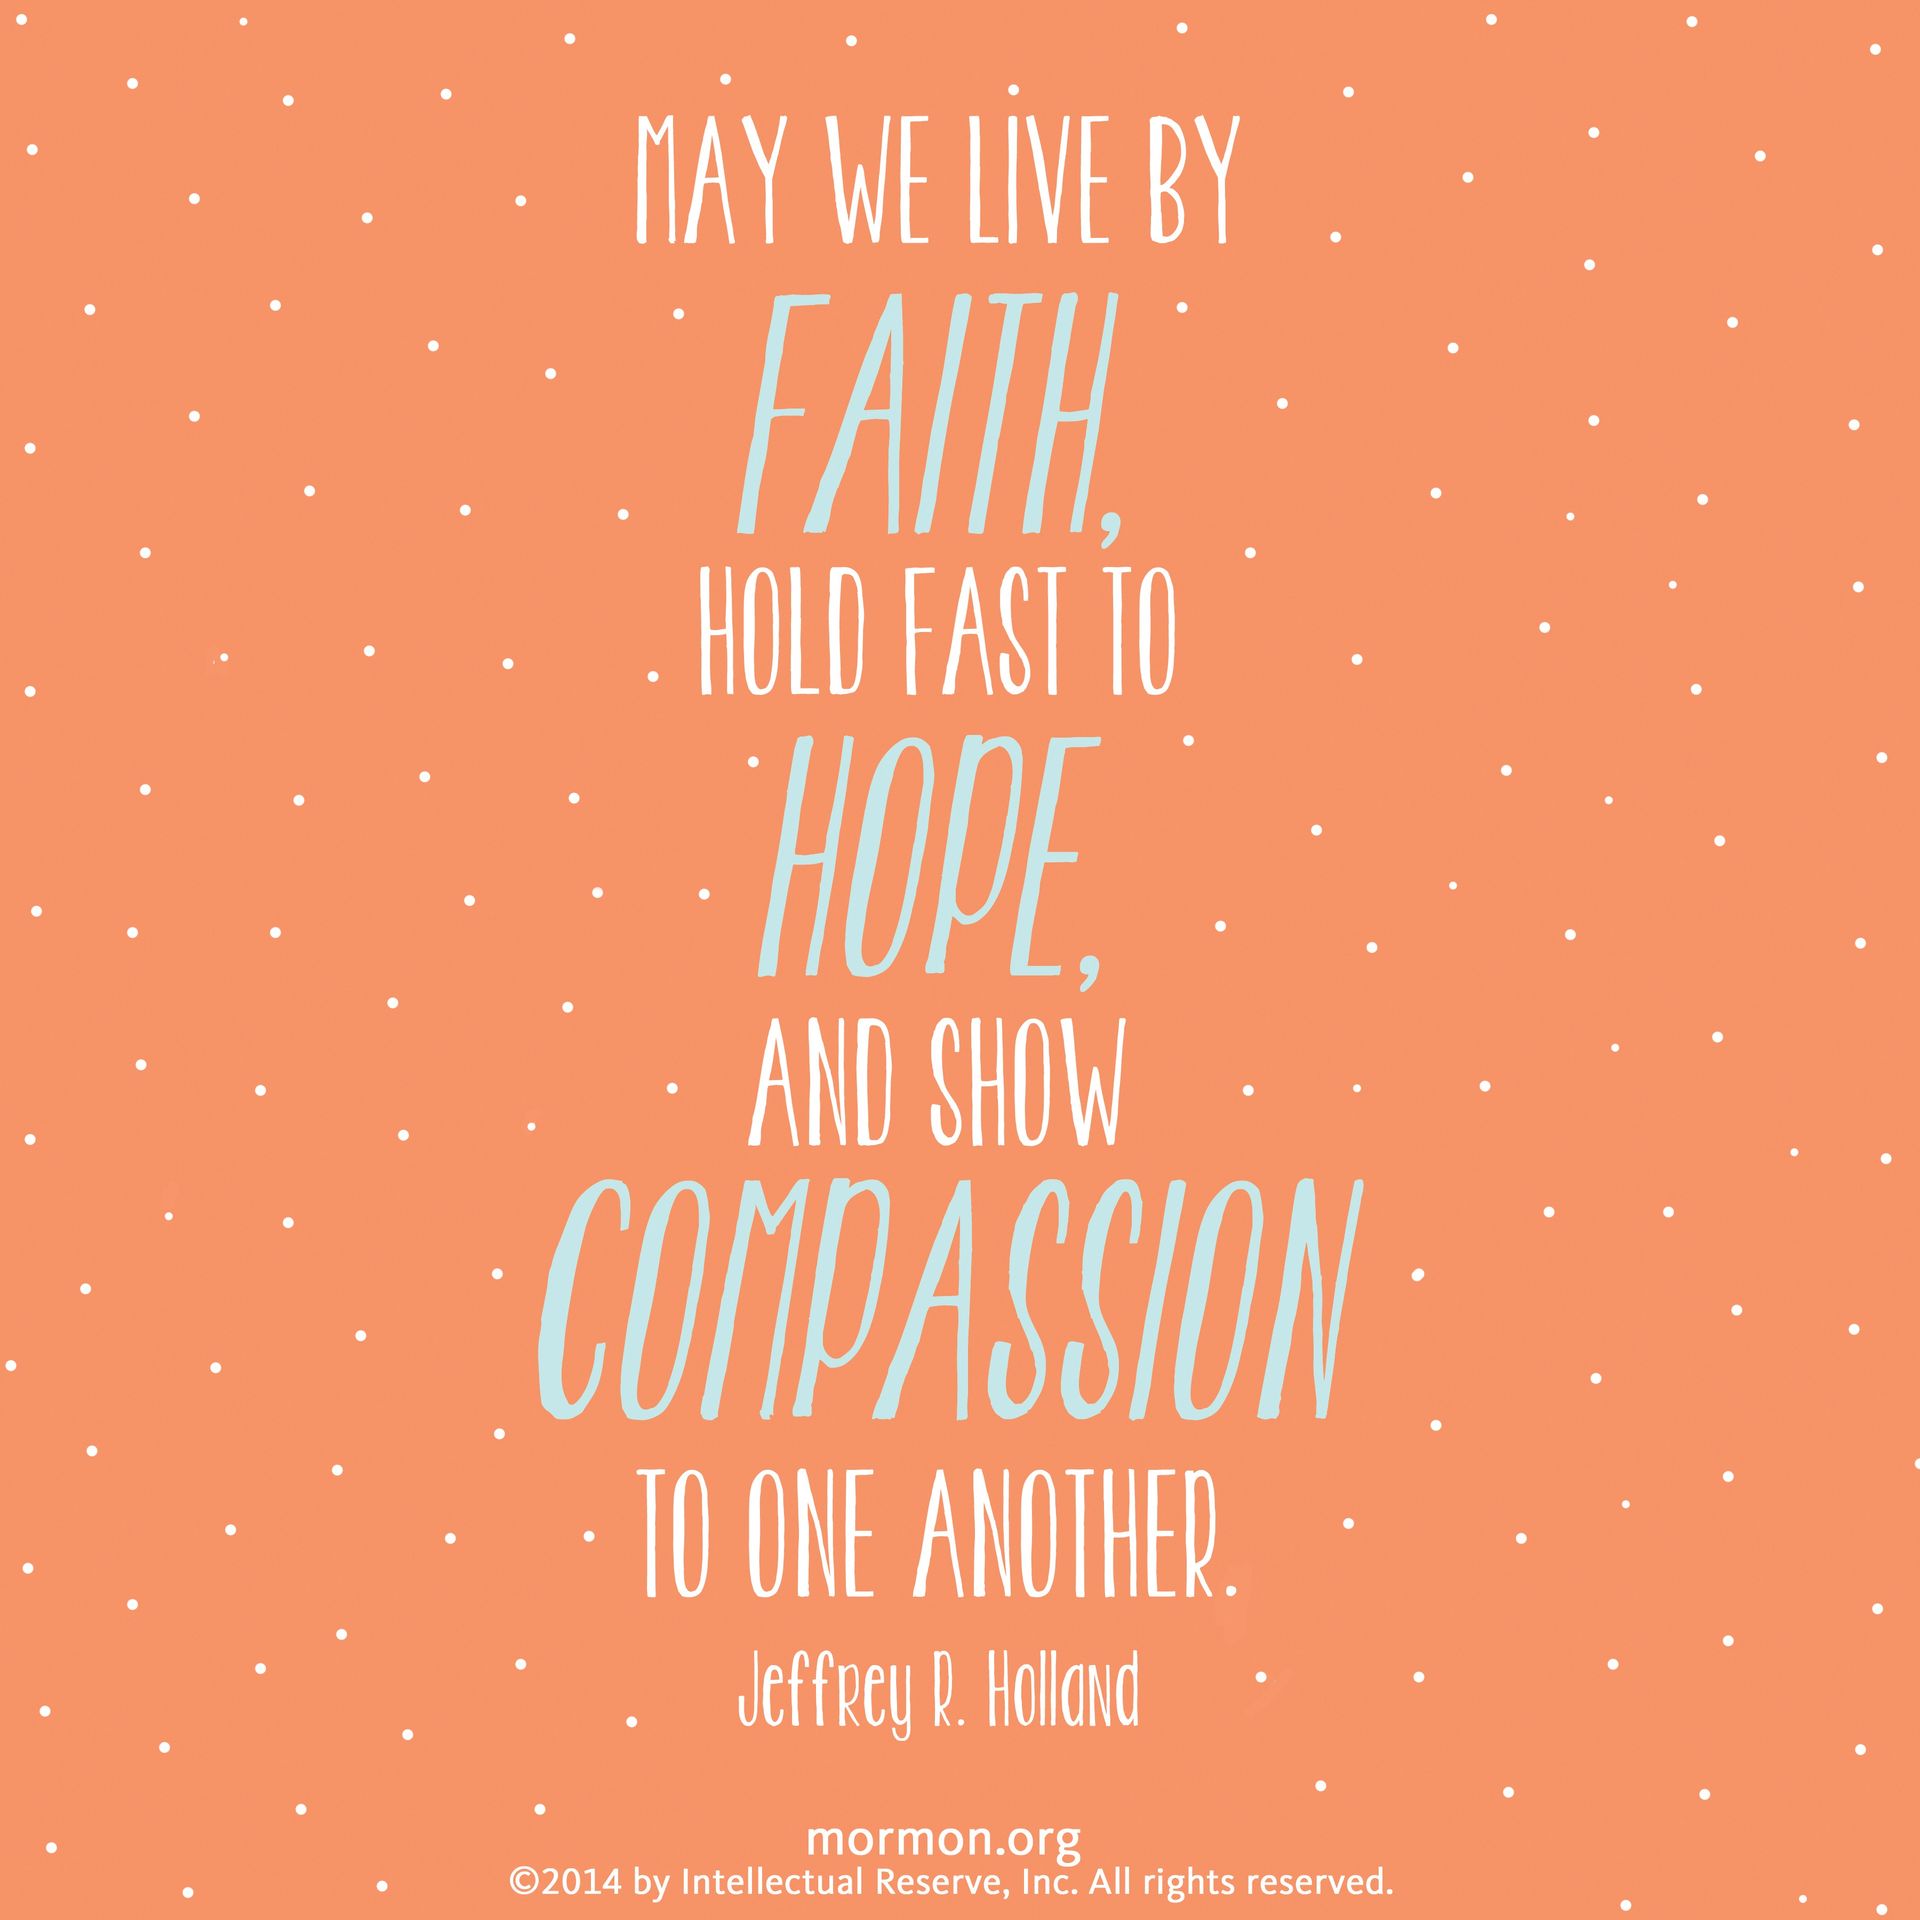 “May we live by faith, hold fast to hope, and show compassion to one another.”—Elder Jeffrey R. Holland, “Like a Broken Vessel”